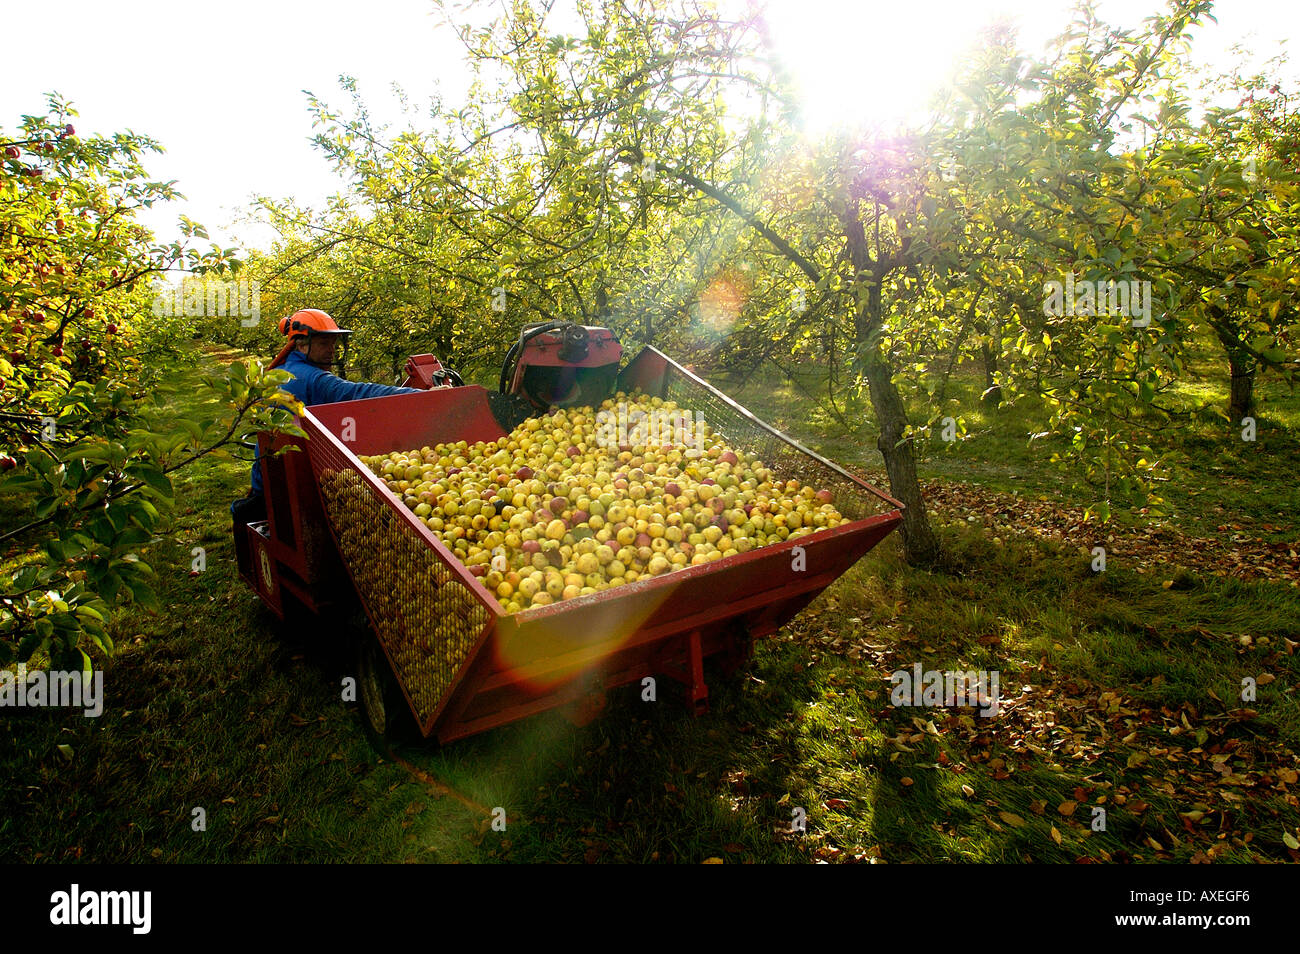 Collecting fallen cider apples Stewley Orchard near Taunton Somerset England Stock Photo